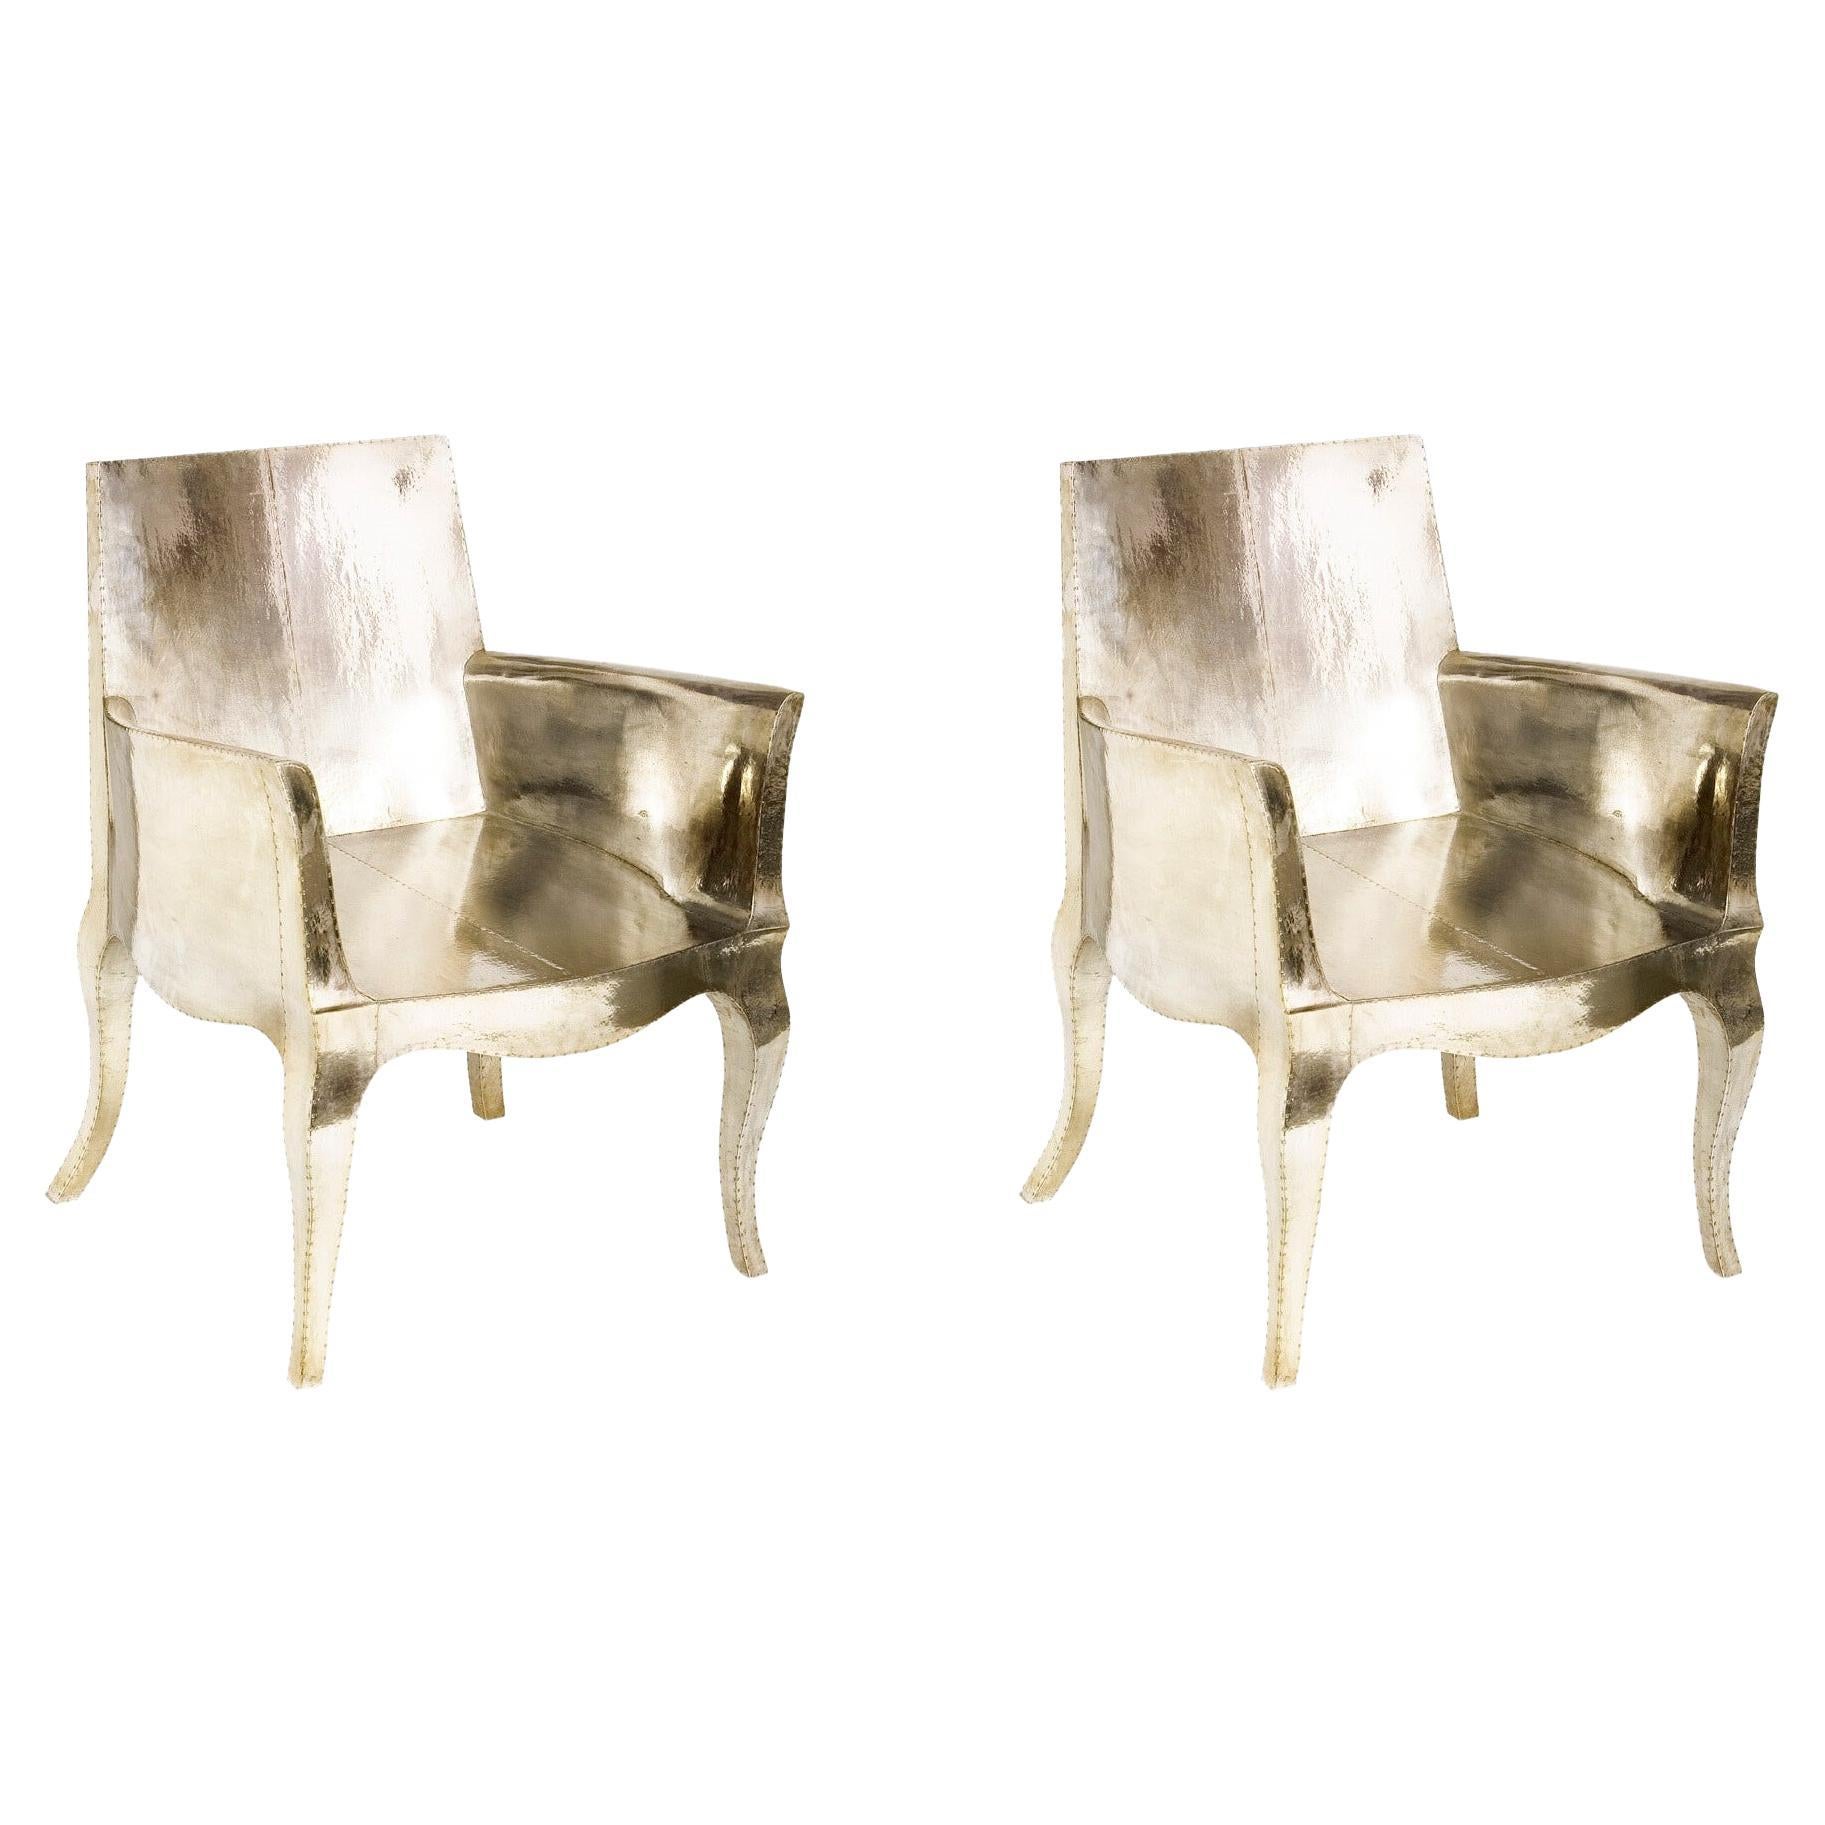 Art Deco Dining Room Chairs Pair Designed by Paul Mathieu for Stephanie Odegard For Sale